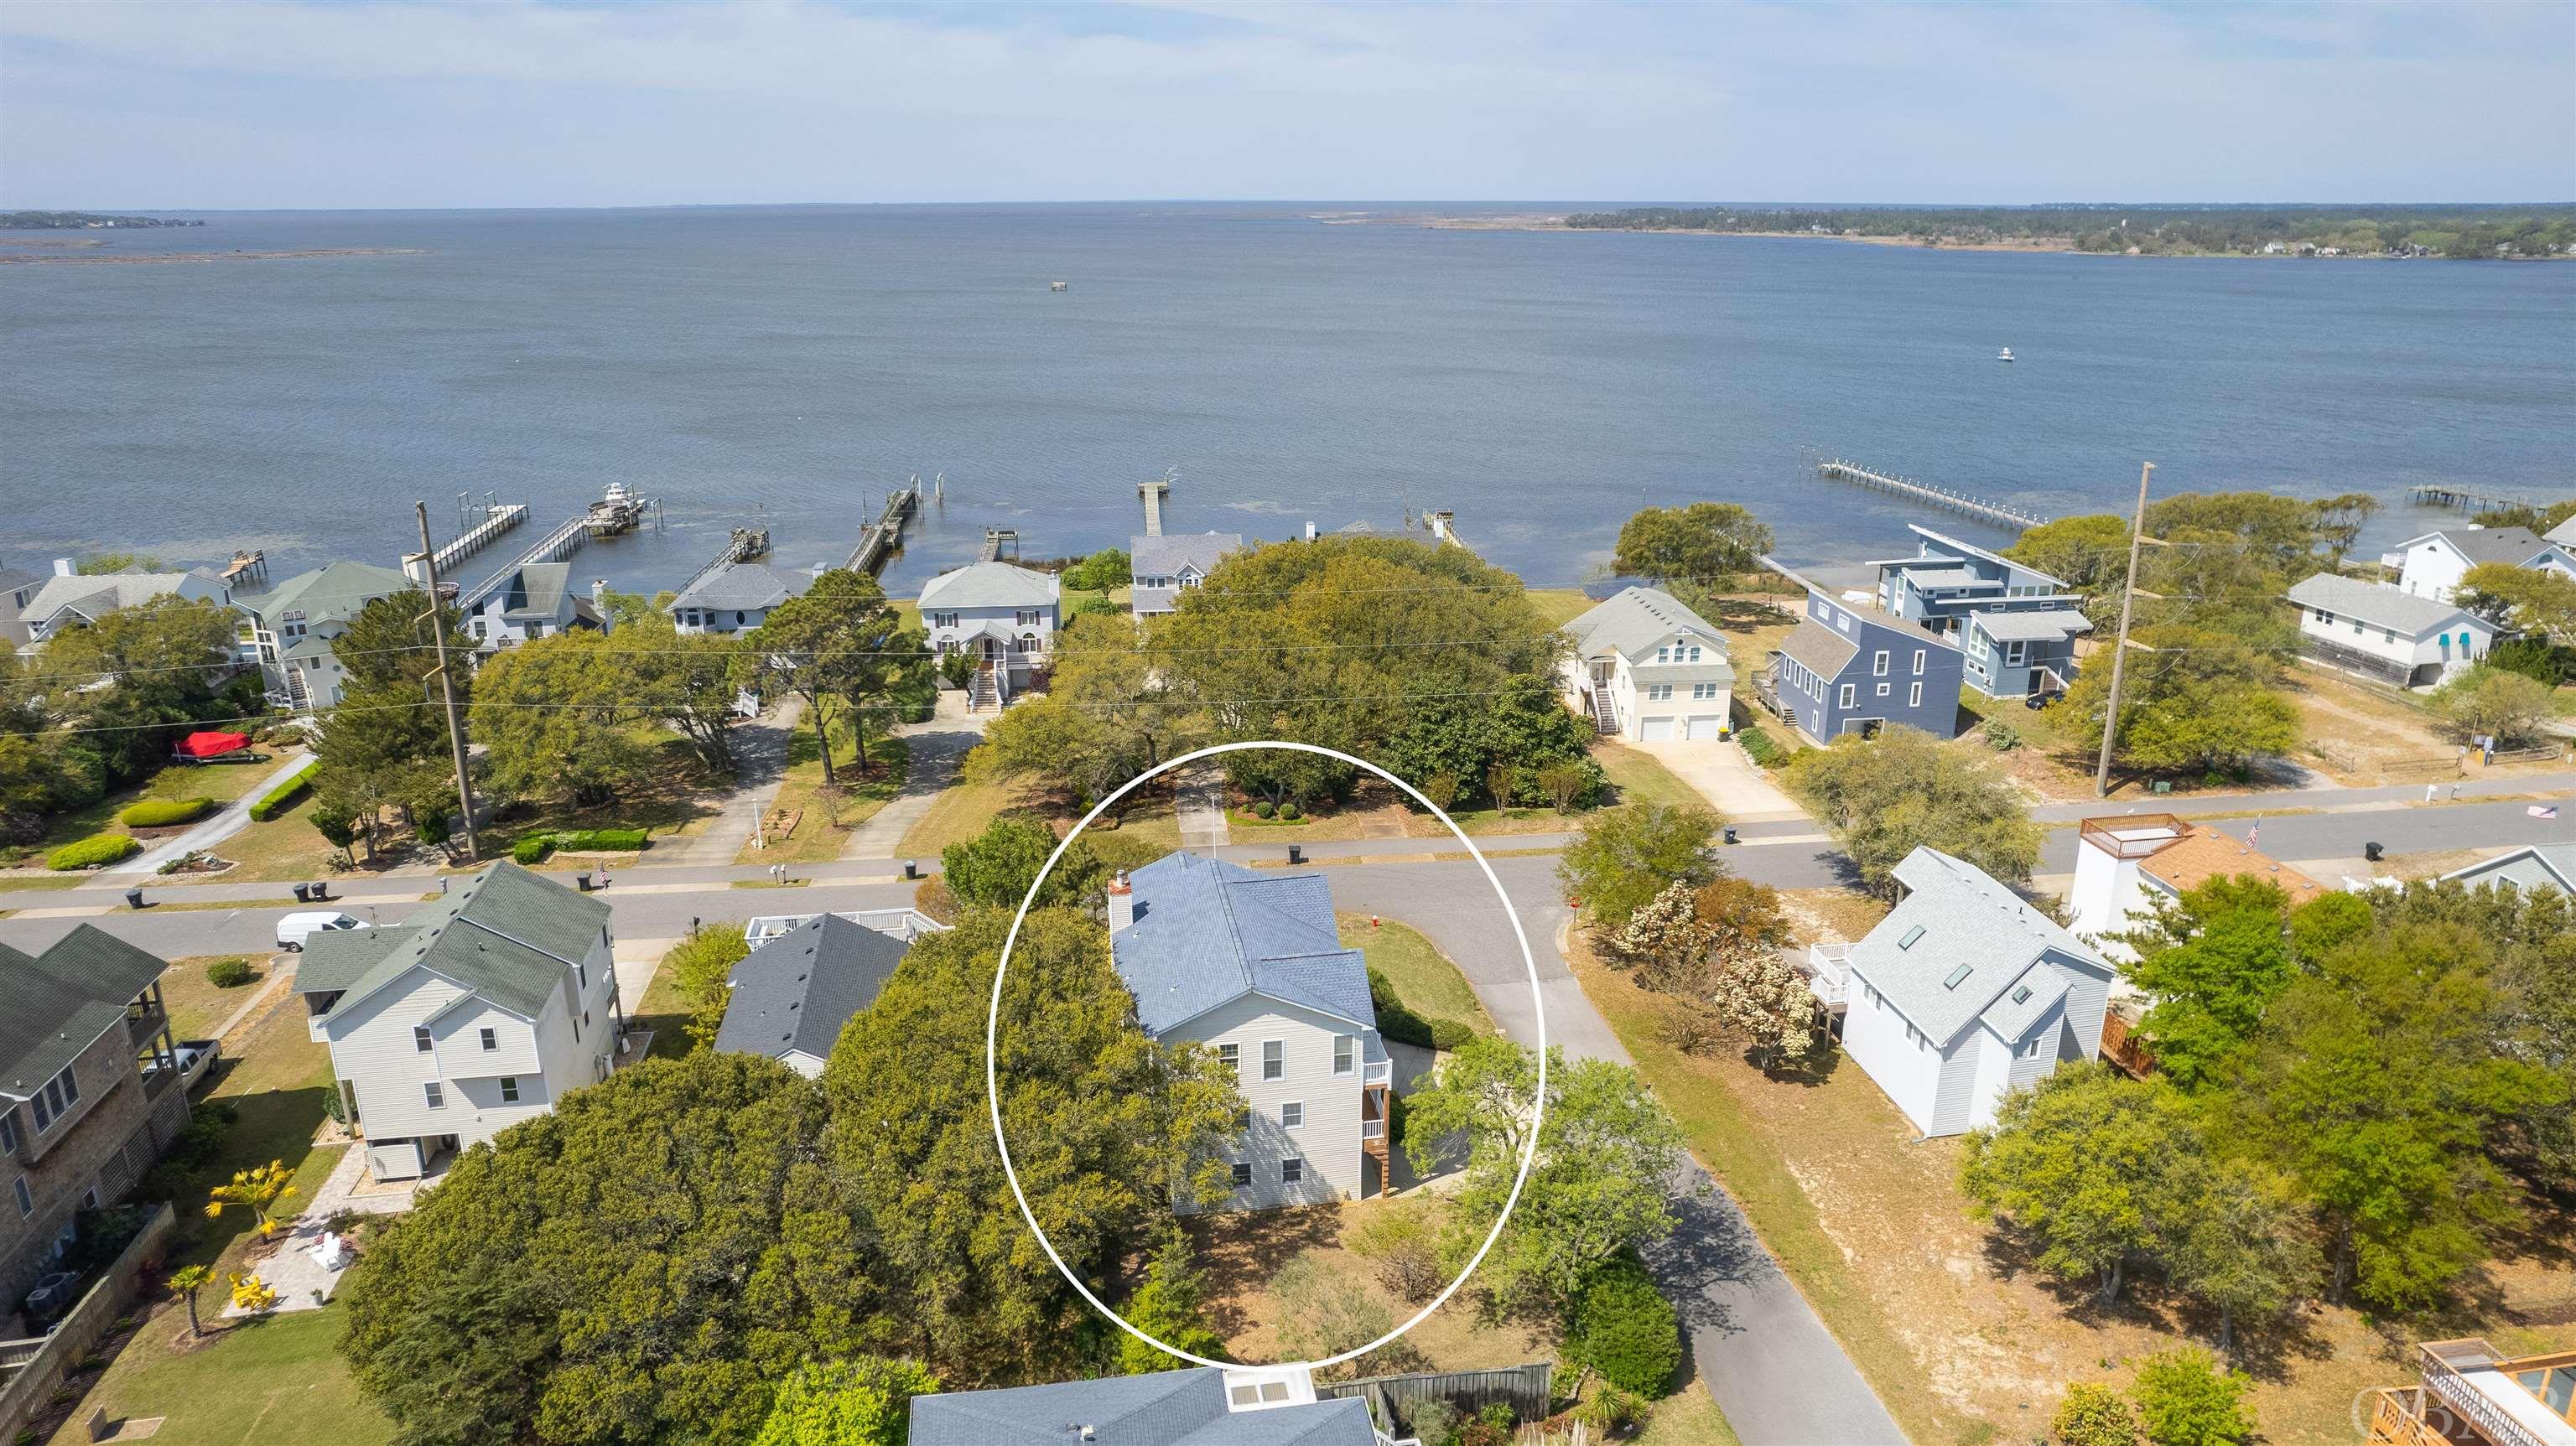 3207 Bay Drive, Kill Devil Hills, NC 27948, 3 Bedrooms Bedrooms, ,2 BathroomsBathrooms,Residential,For sale,Bay Drive,125381